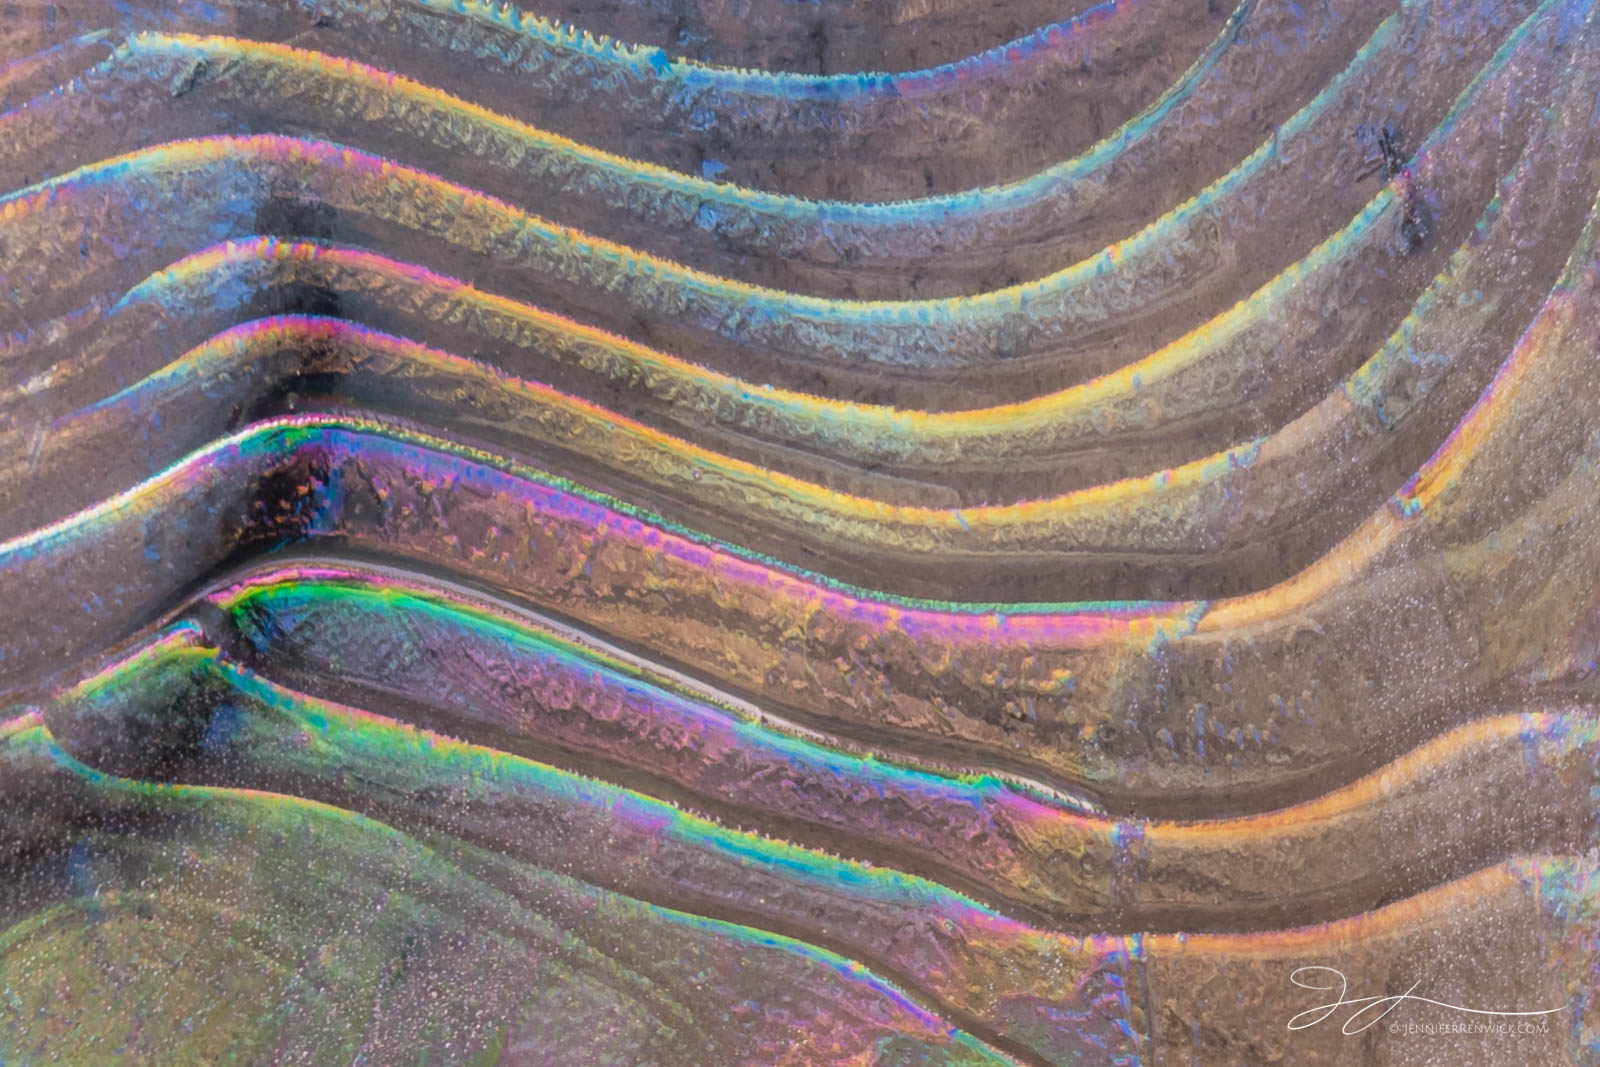 Striated ice in a canyon picks up natural light and reflects vibrant colors.